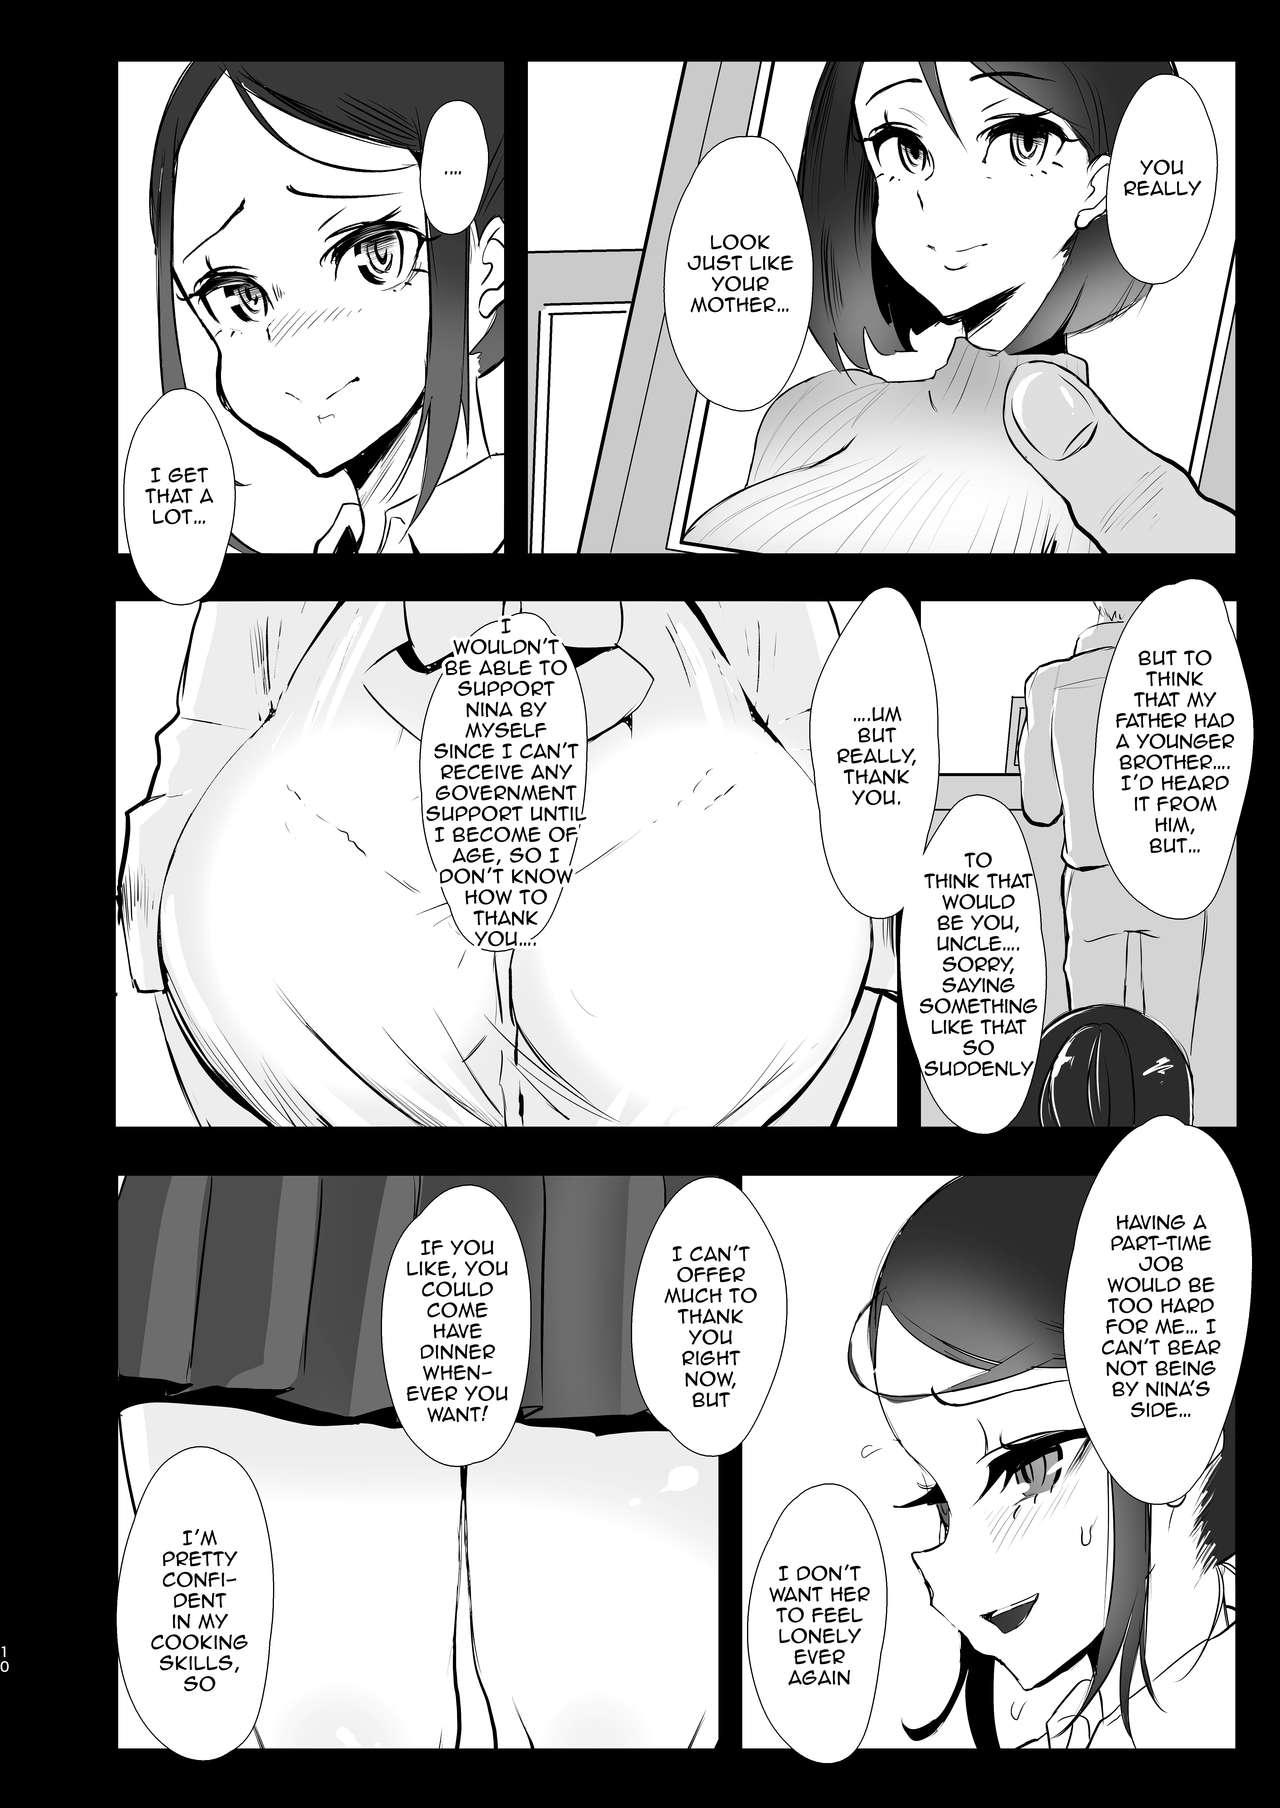 Asia Himawari no Kage | The Other Side of the Sunflower - Original Her - Page 9